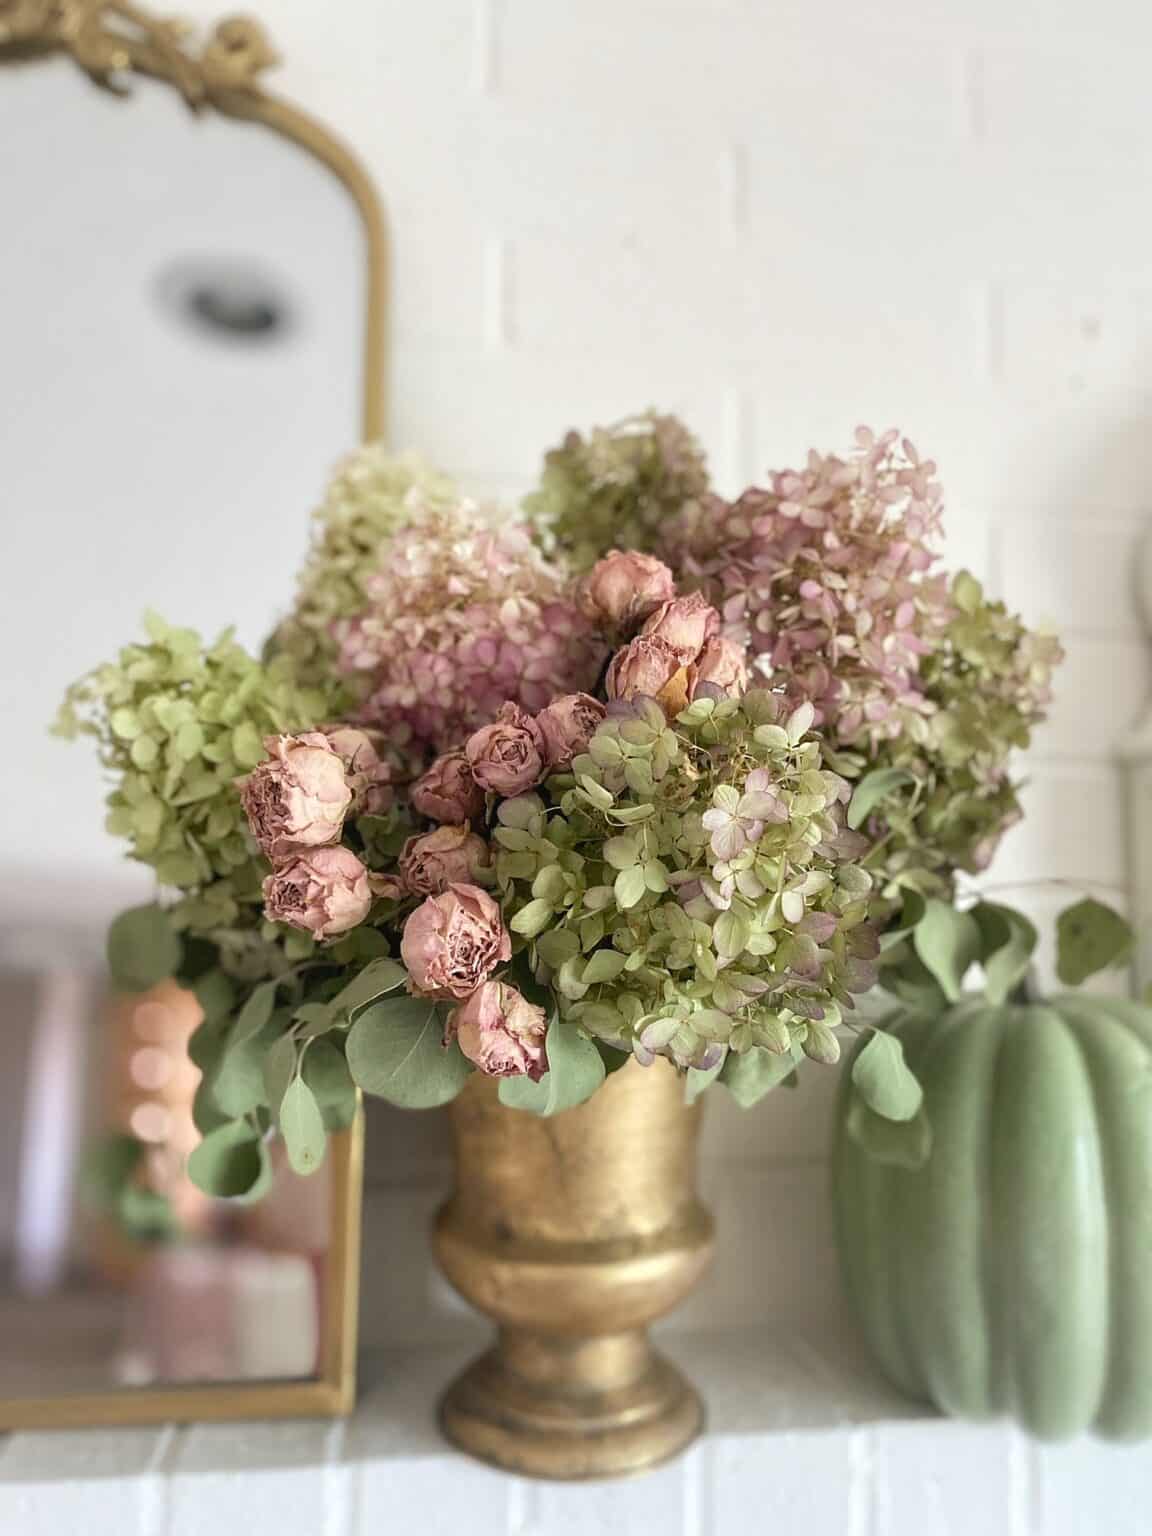 Drying Hydrangeas in Autumn ⋆ SomeTyme Place ⋆